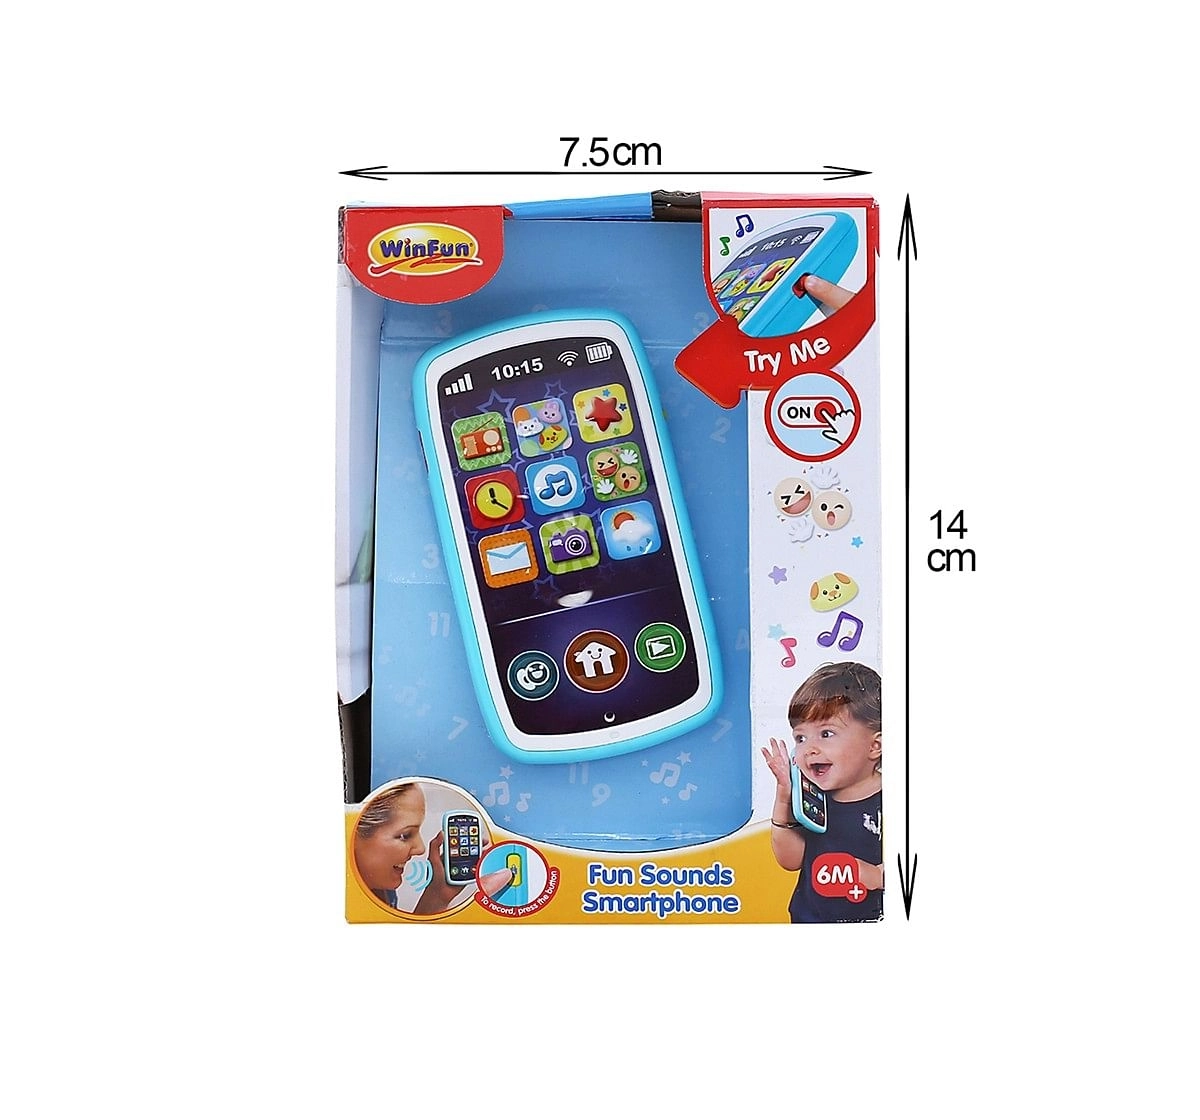 Winfun Fun Sounds Smartphone, Multi Color Early Learner Toys for Kids age 6M+ 